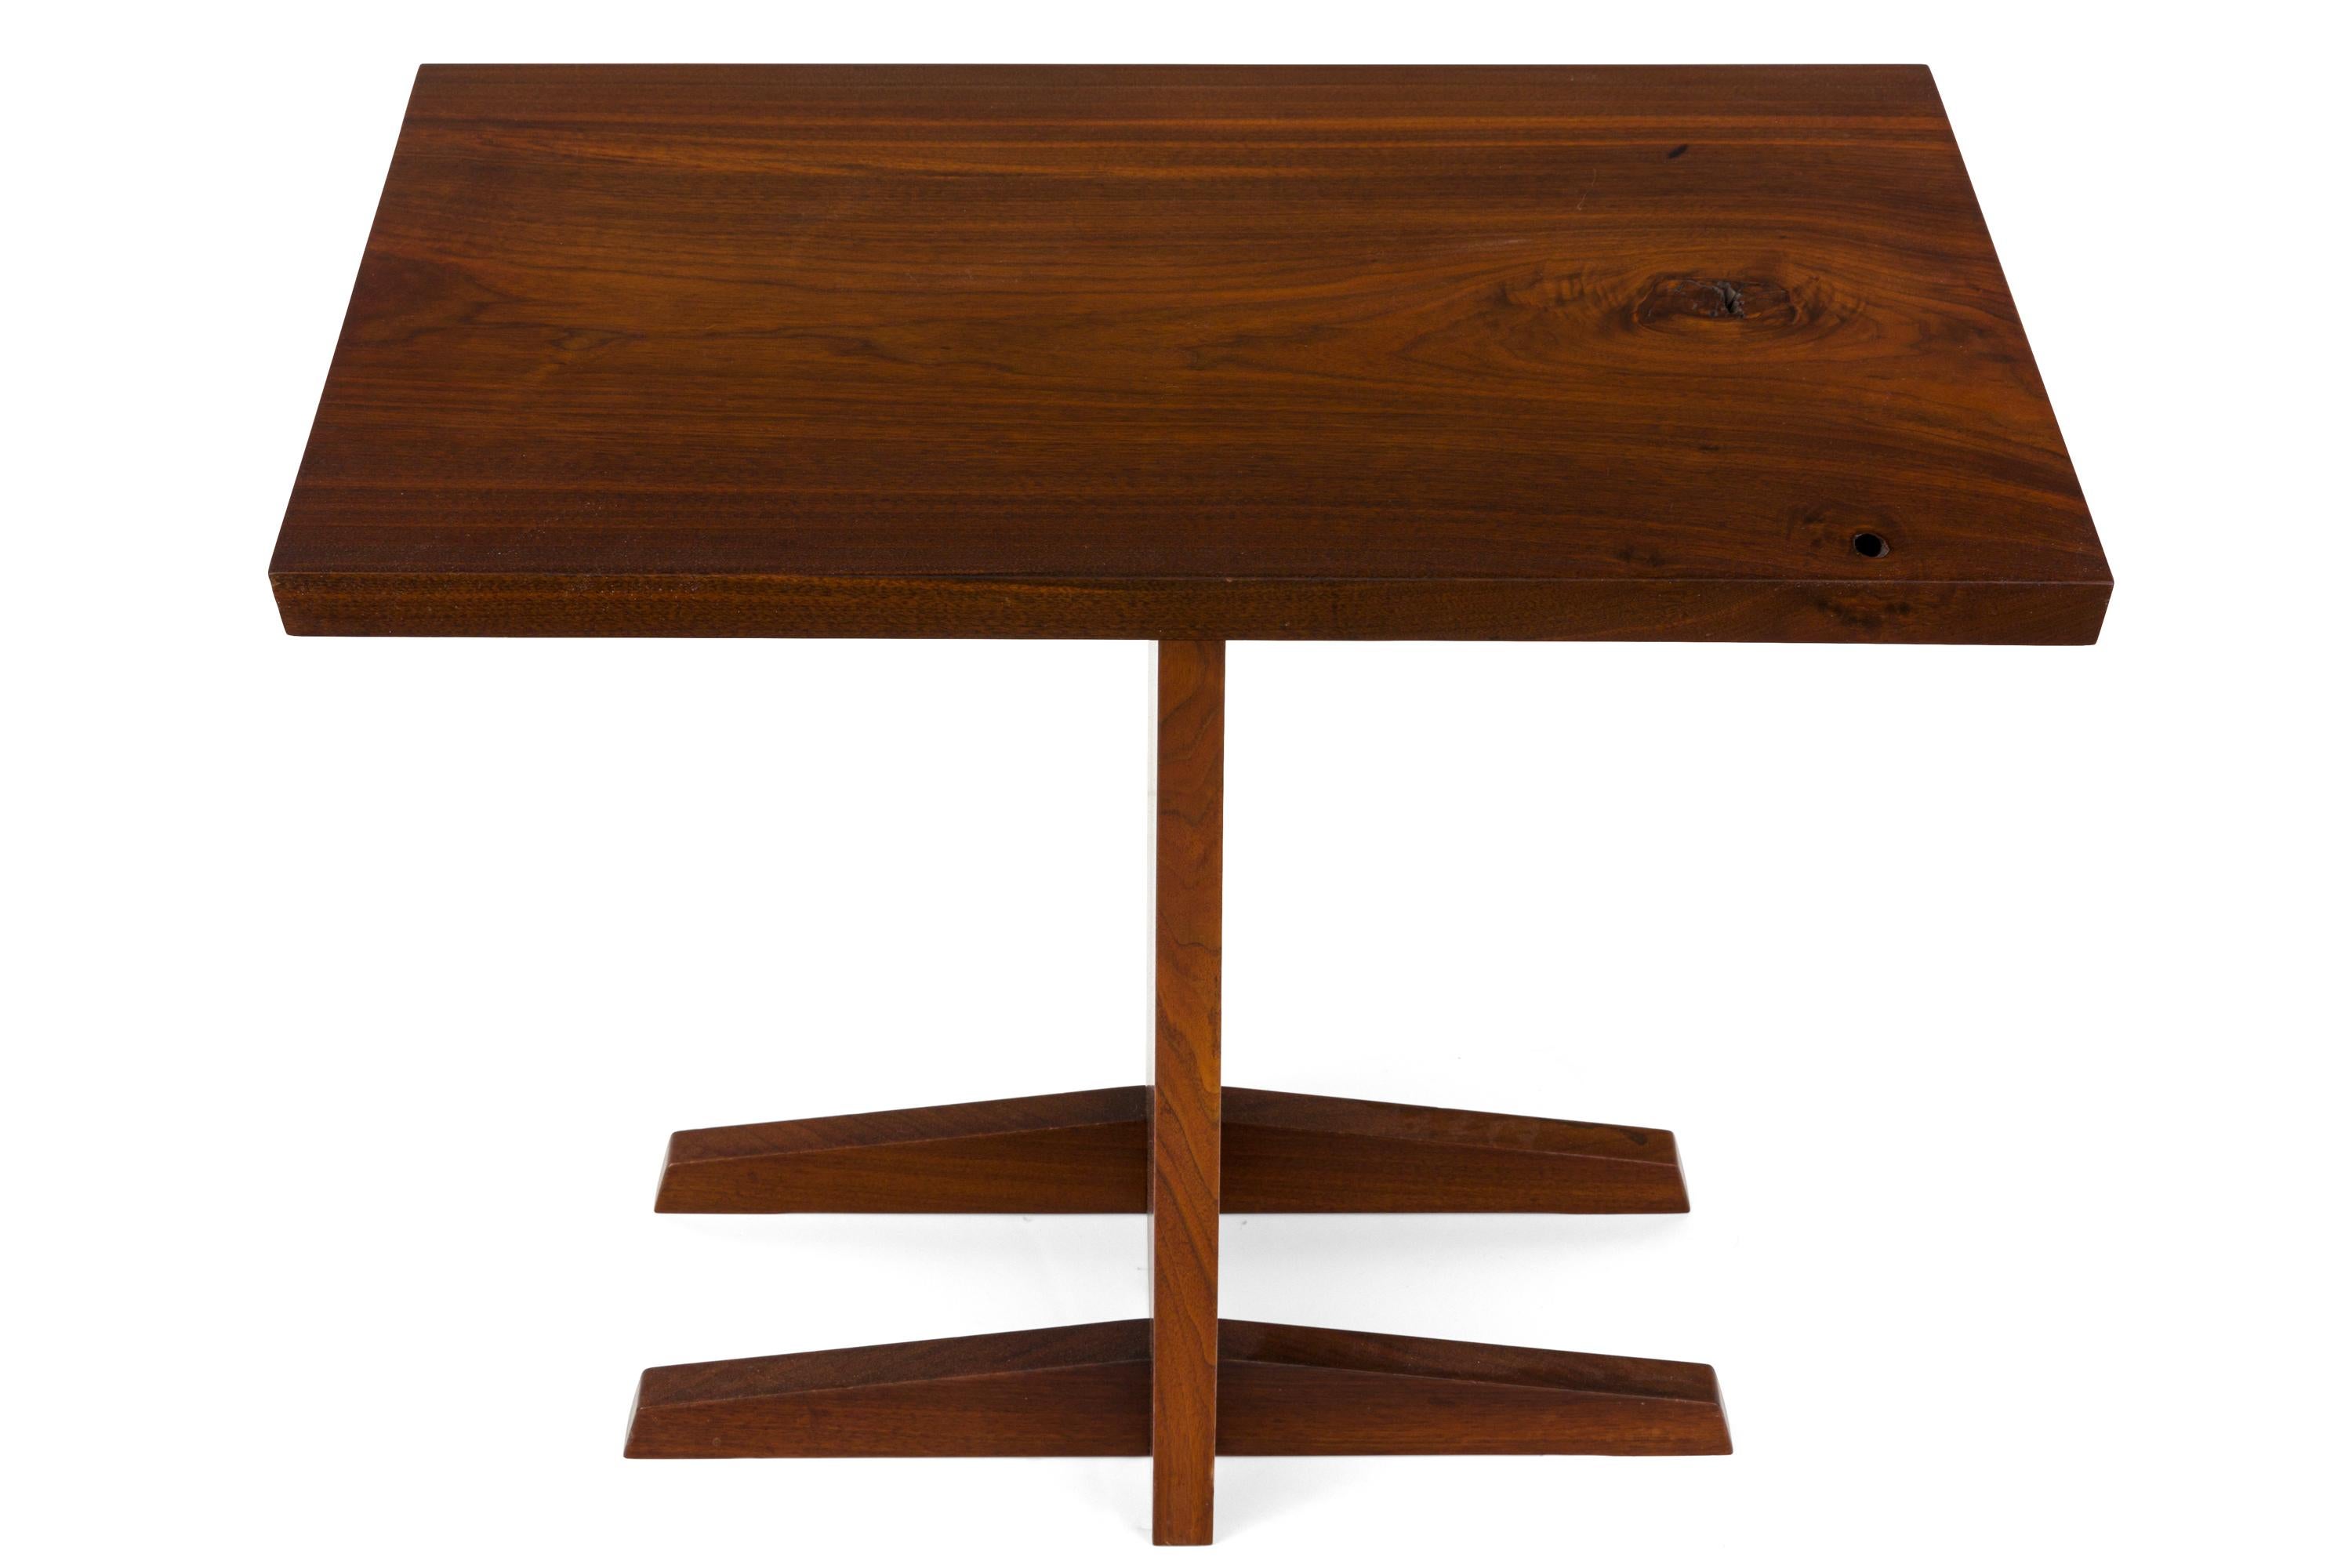 This table has wonderful proportion and scale making it useful for a variety of purposes.

 